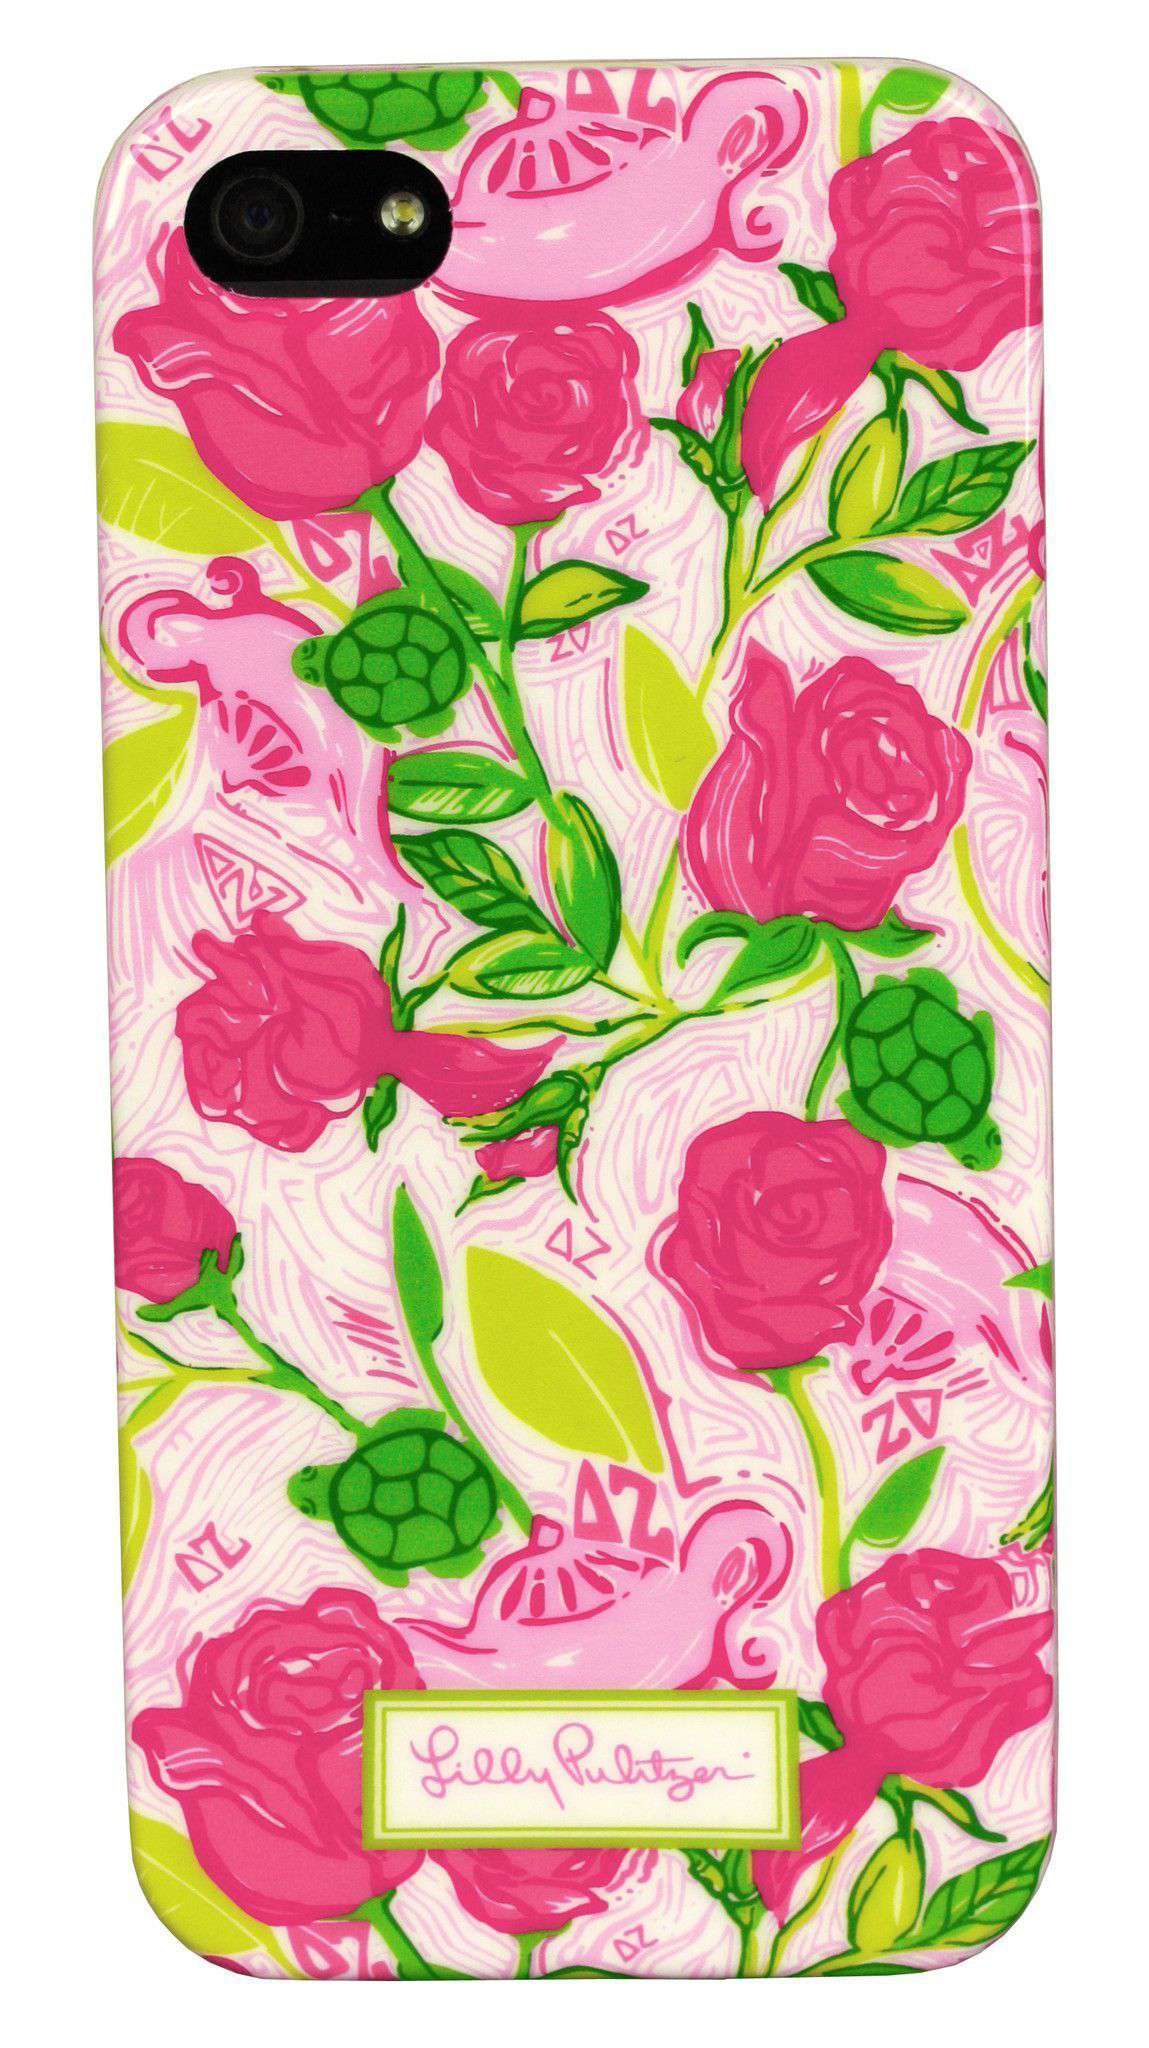 Delta Zeta iPhone 5/5s Cover by Lilly Pulitzer - Country Club Prep